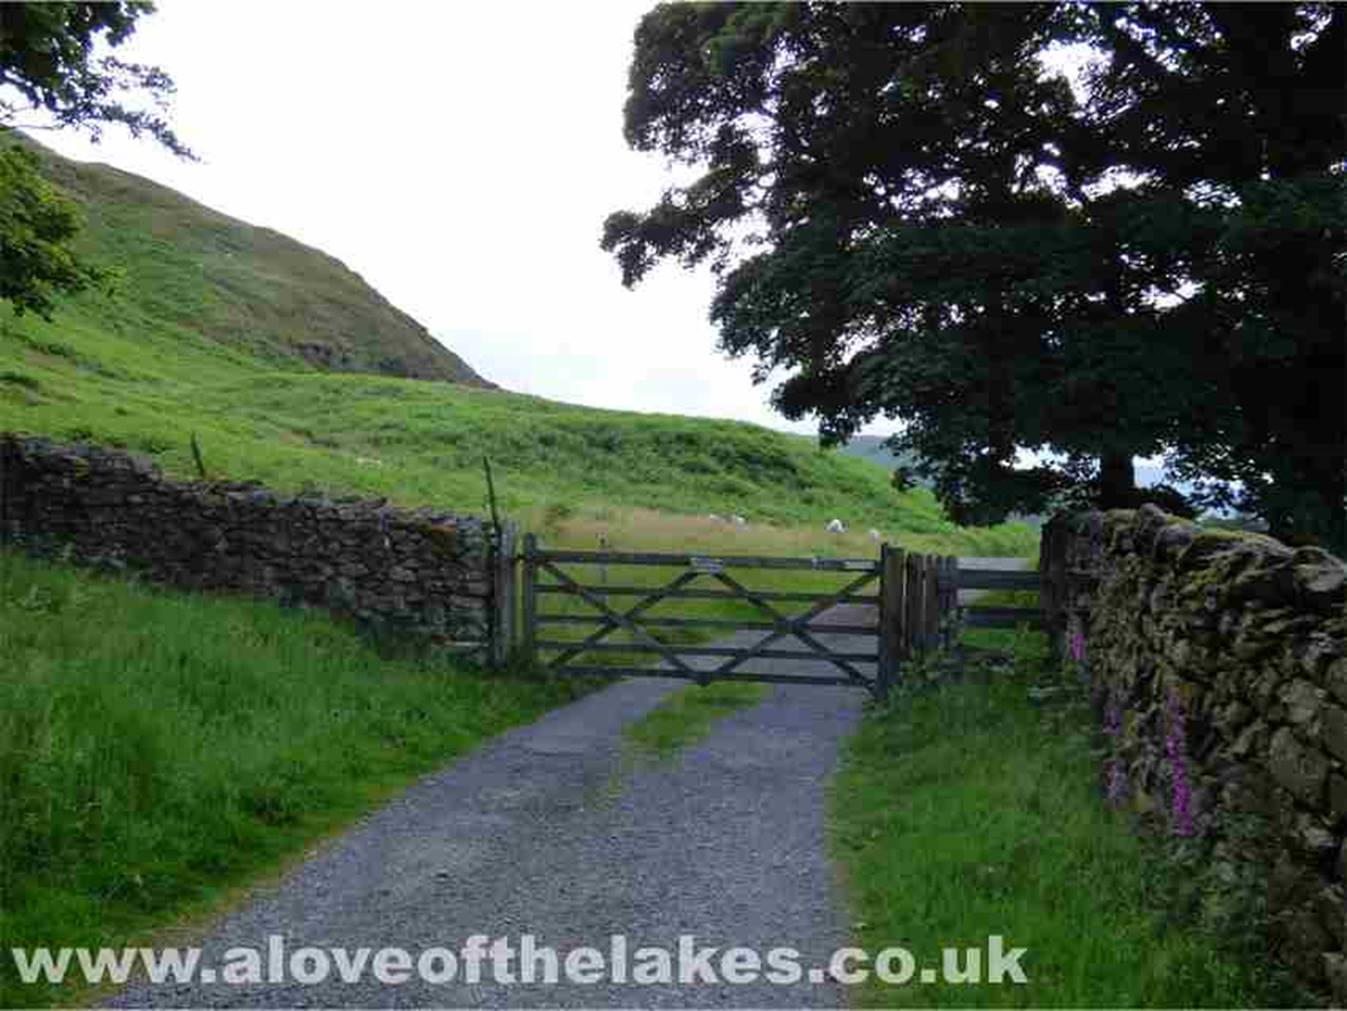 Carry on down the path and through the gate that leads on to the open fell side immediately on the left